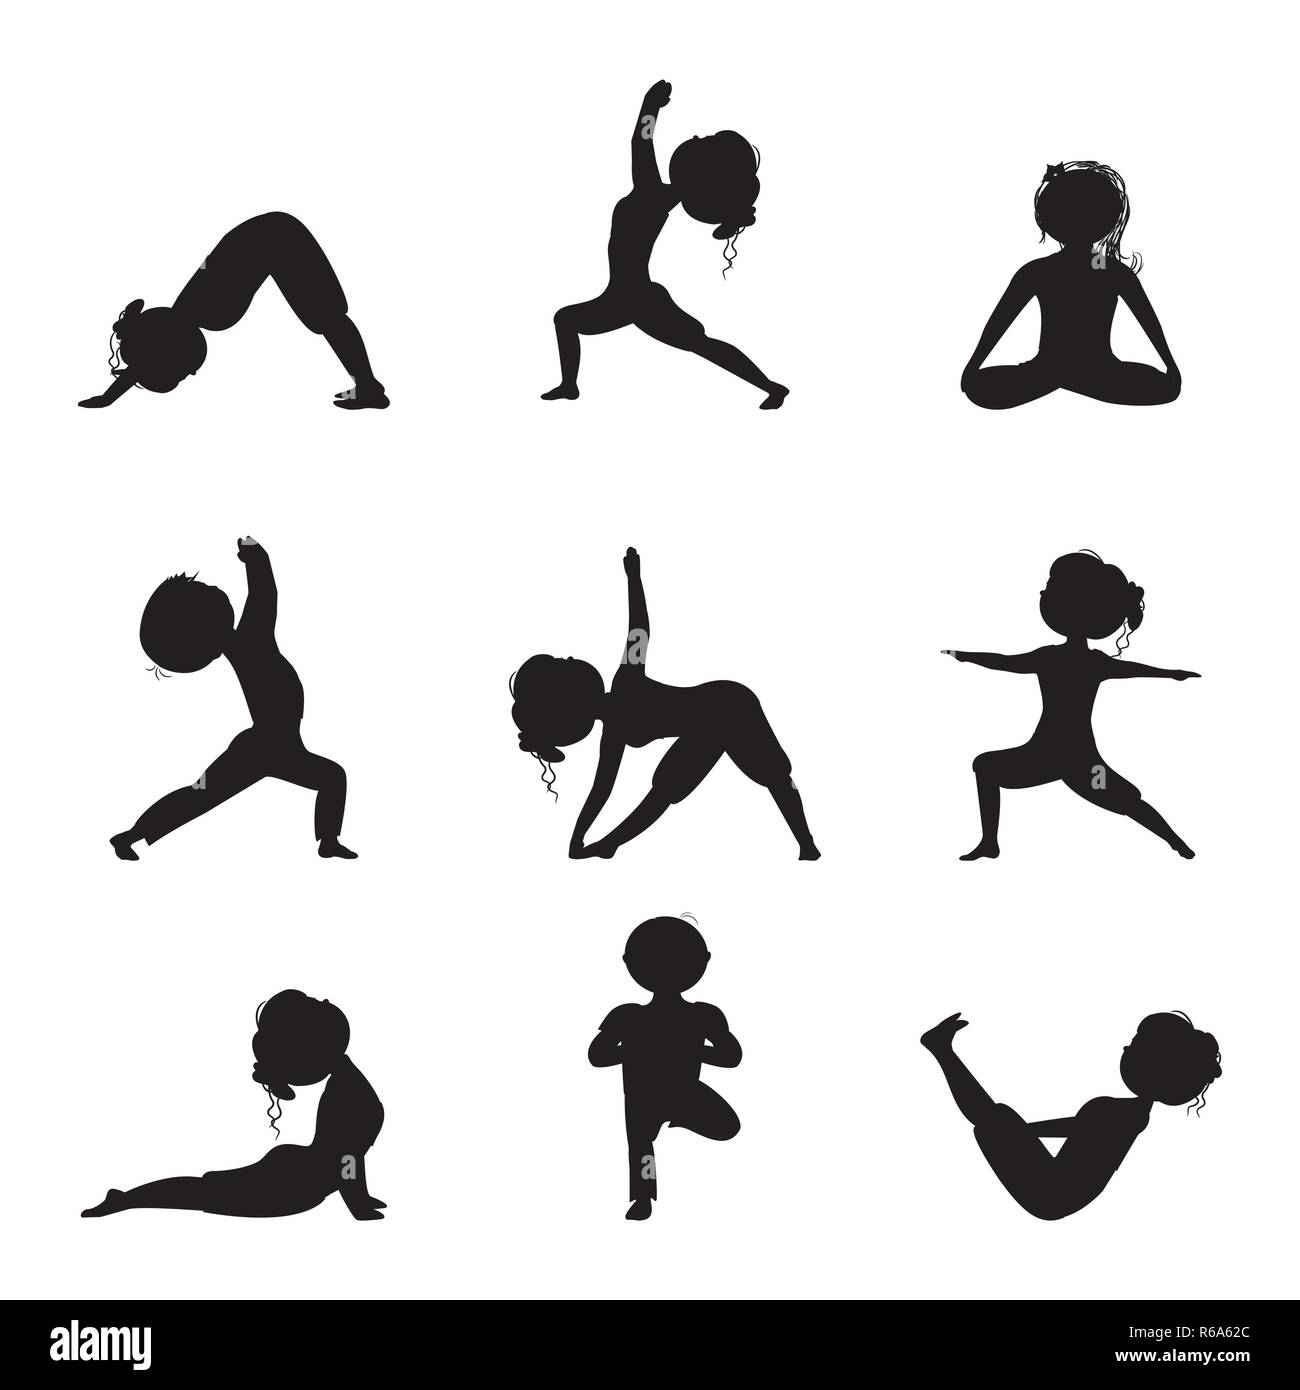 Woman exercises yoga sitting pose silhouette Vector Image